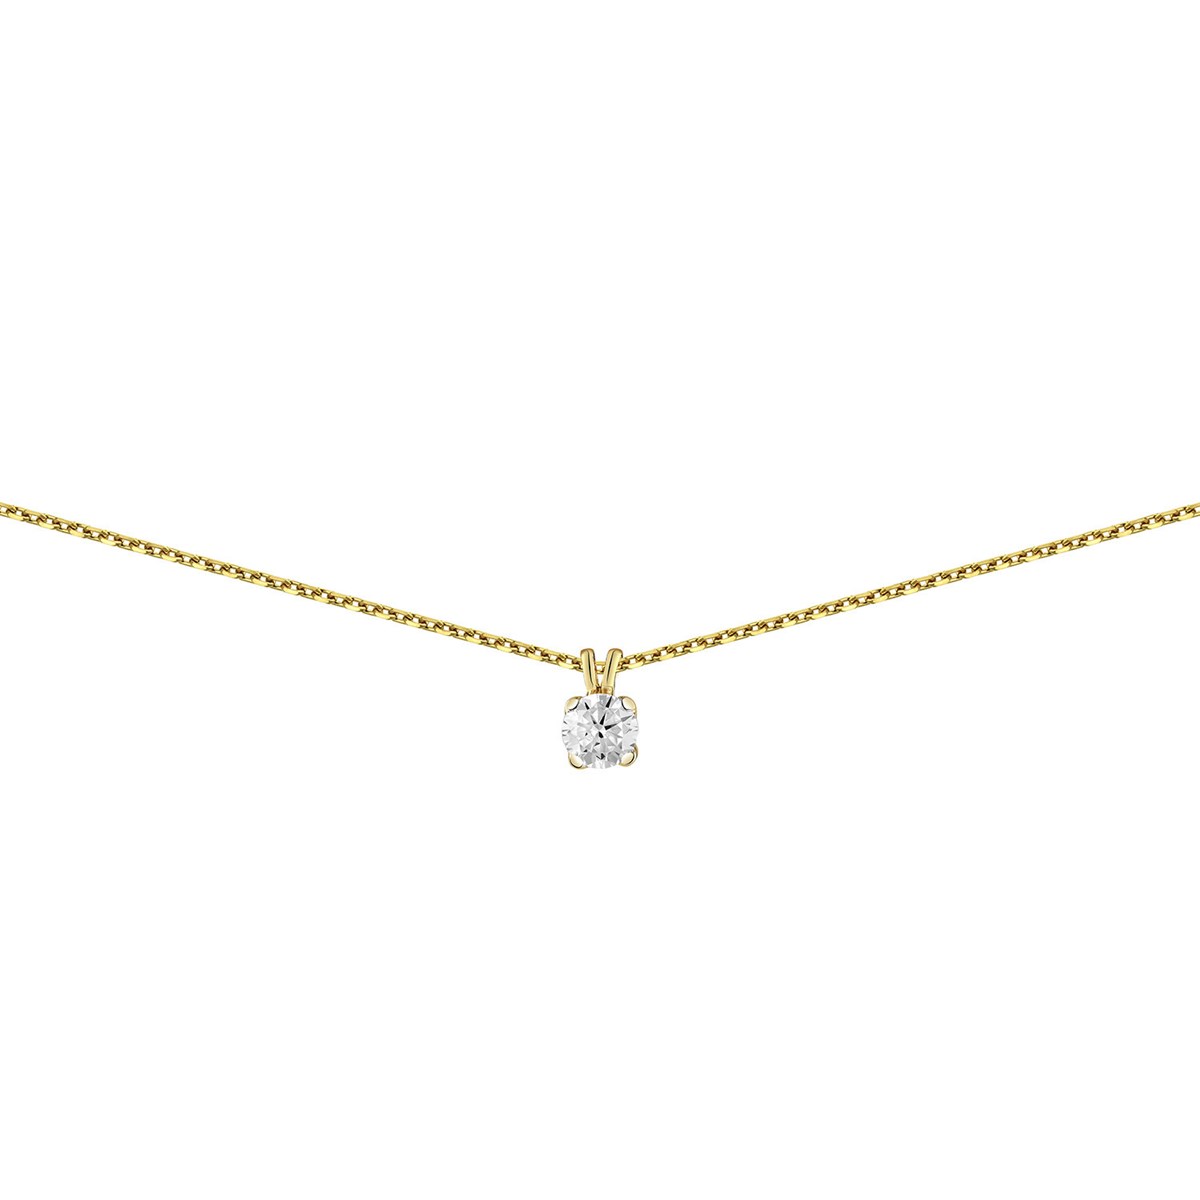 Collier solitaire diamant Brillaxis or 18 carats
0.30 ct